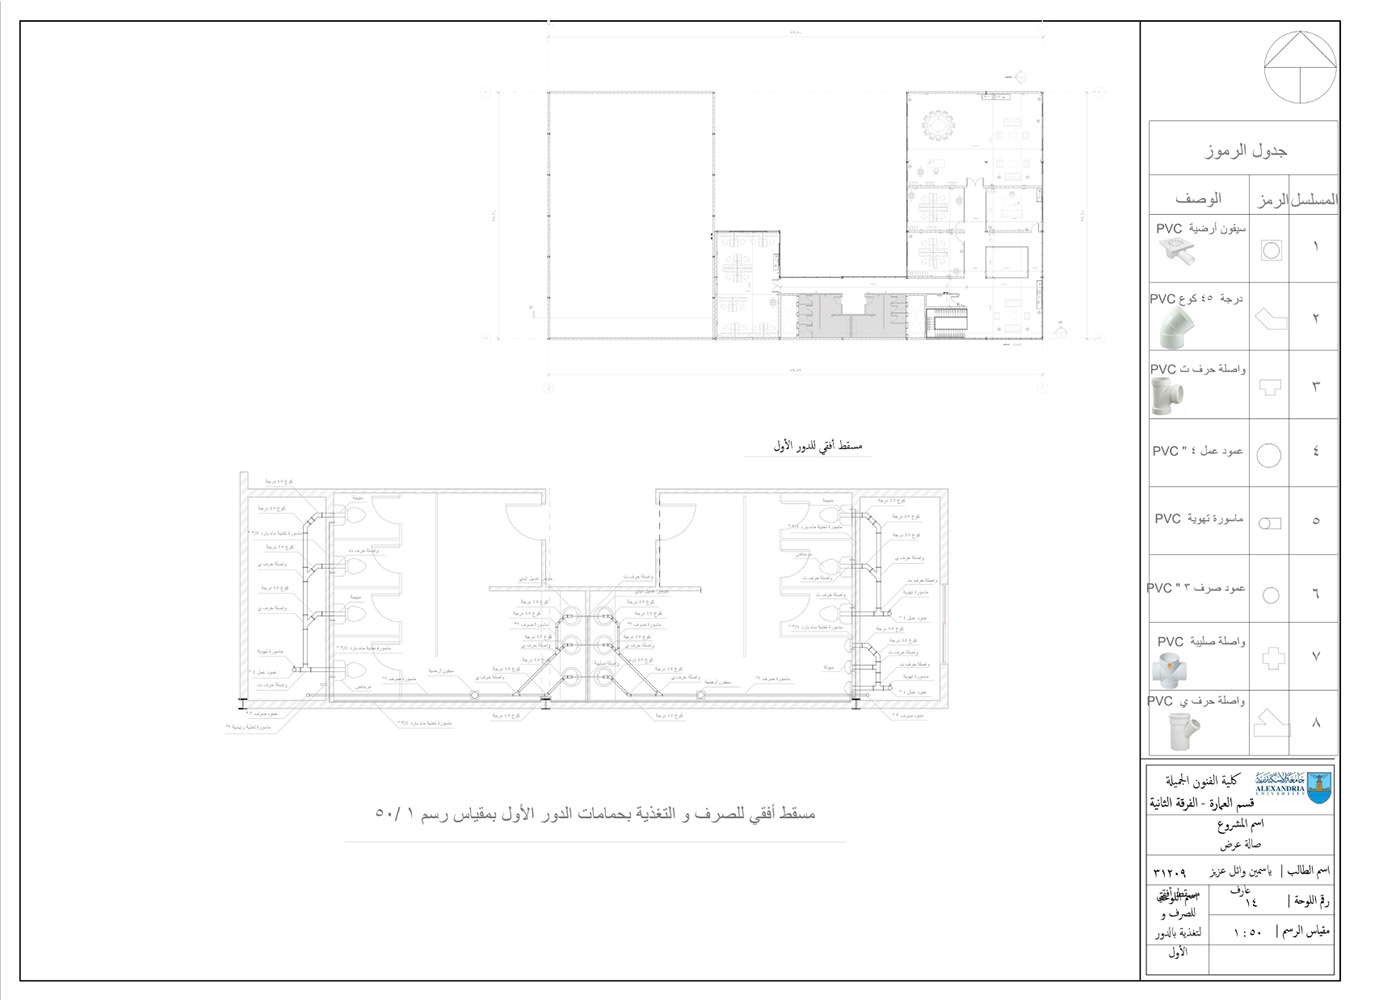 architecture details Elevations exterior plans sections working drawings